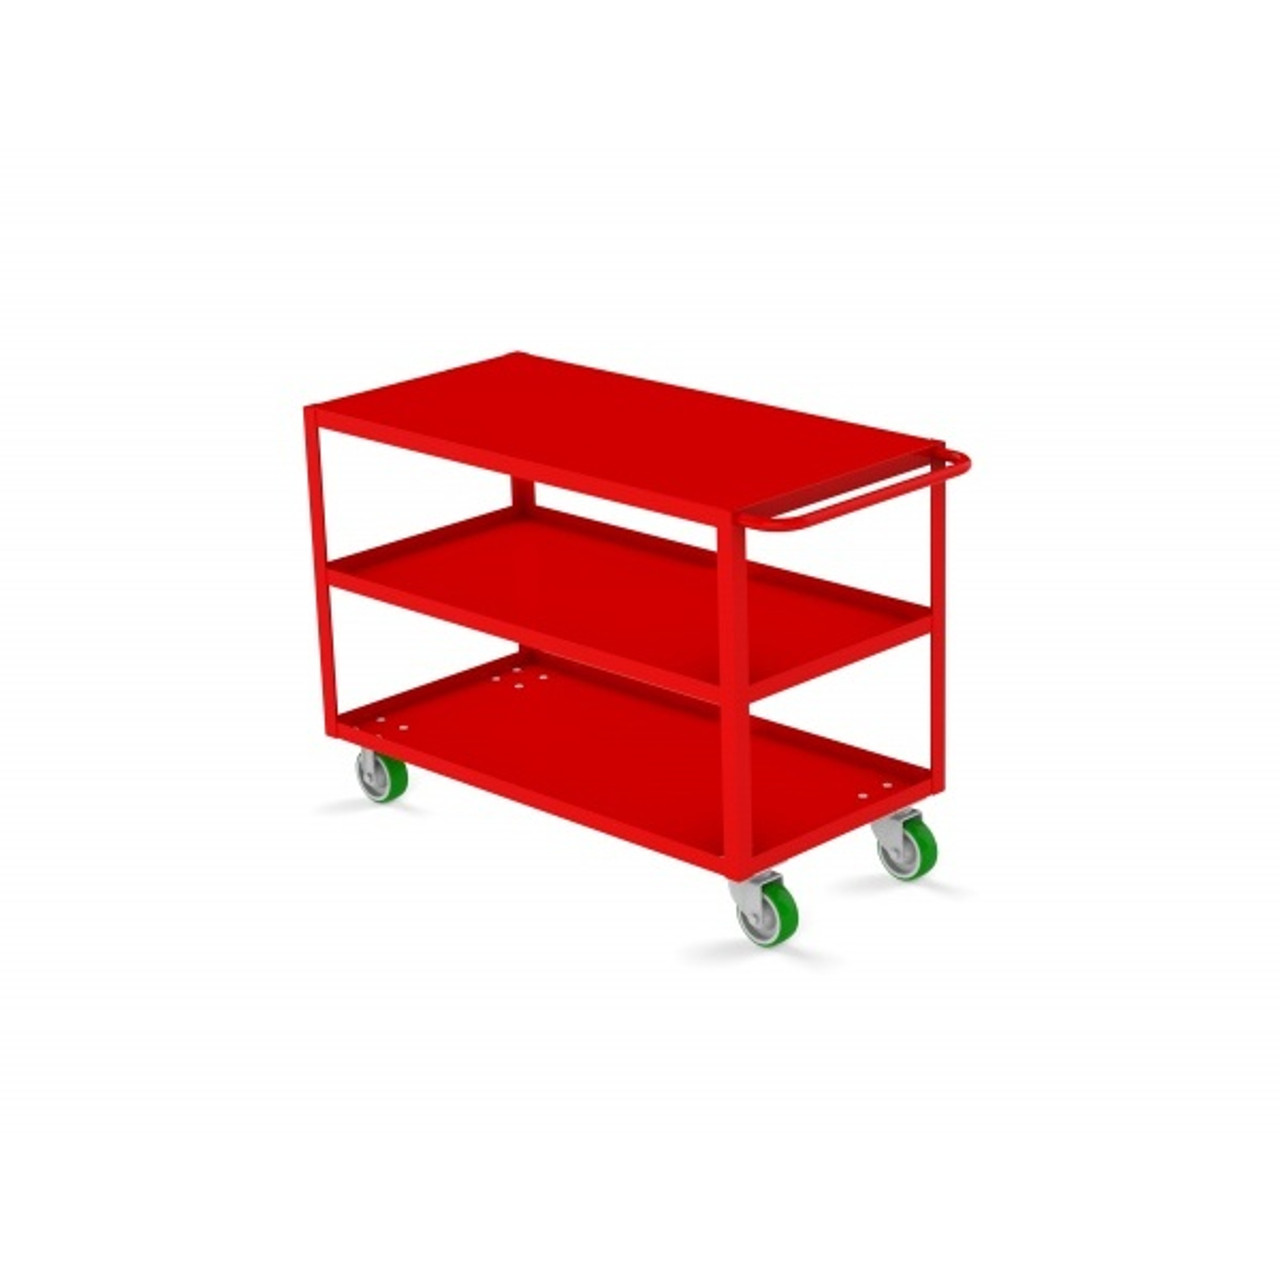 Valley Craft Three Shelf 30 x 48" Flush-Top Utility Cart, Red with Poly Casters (CALL FOR BEST PRICING)